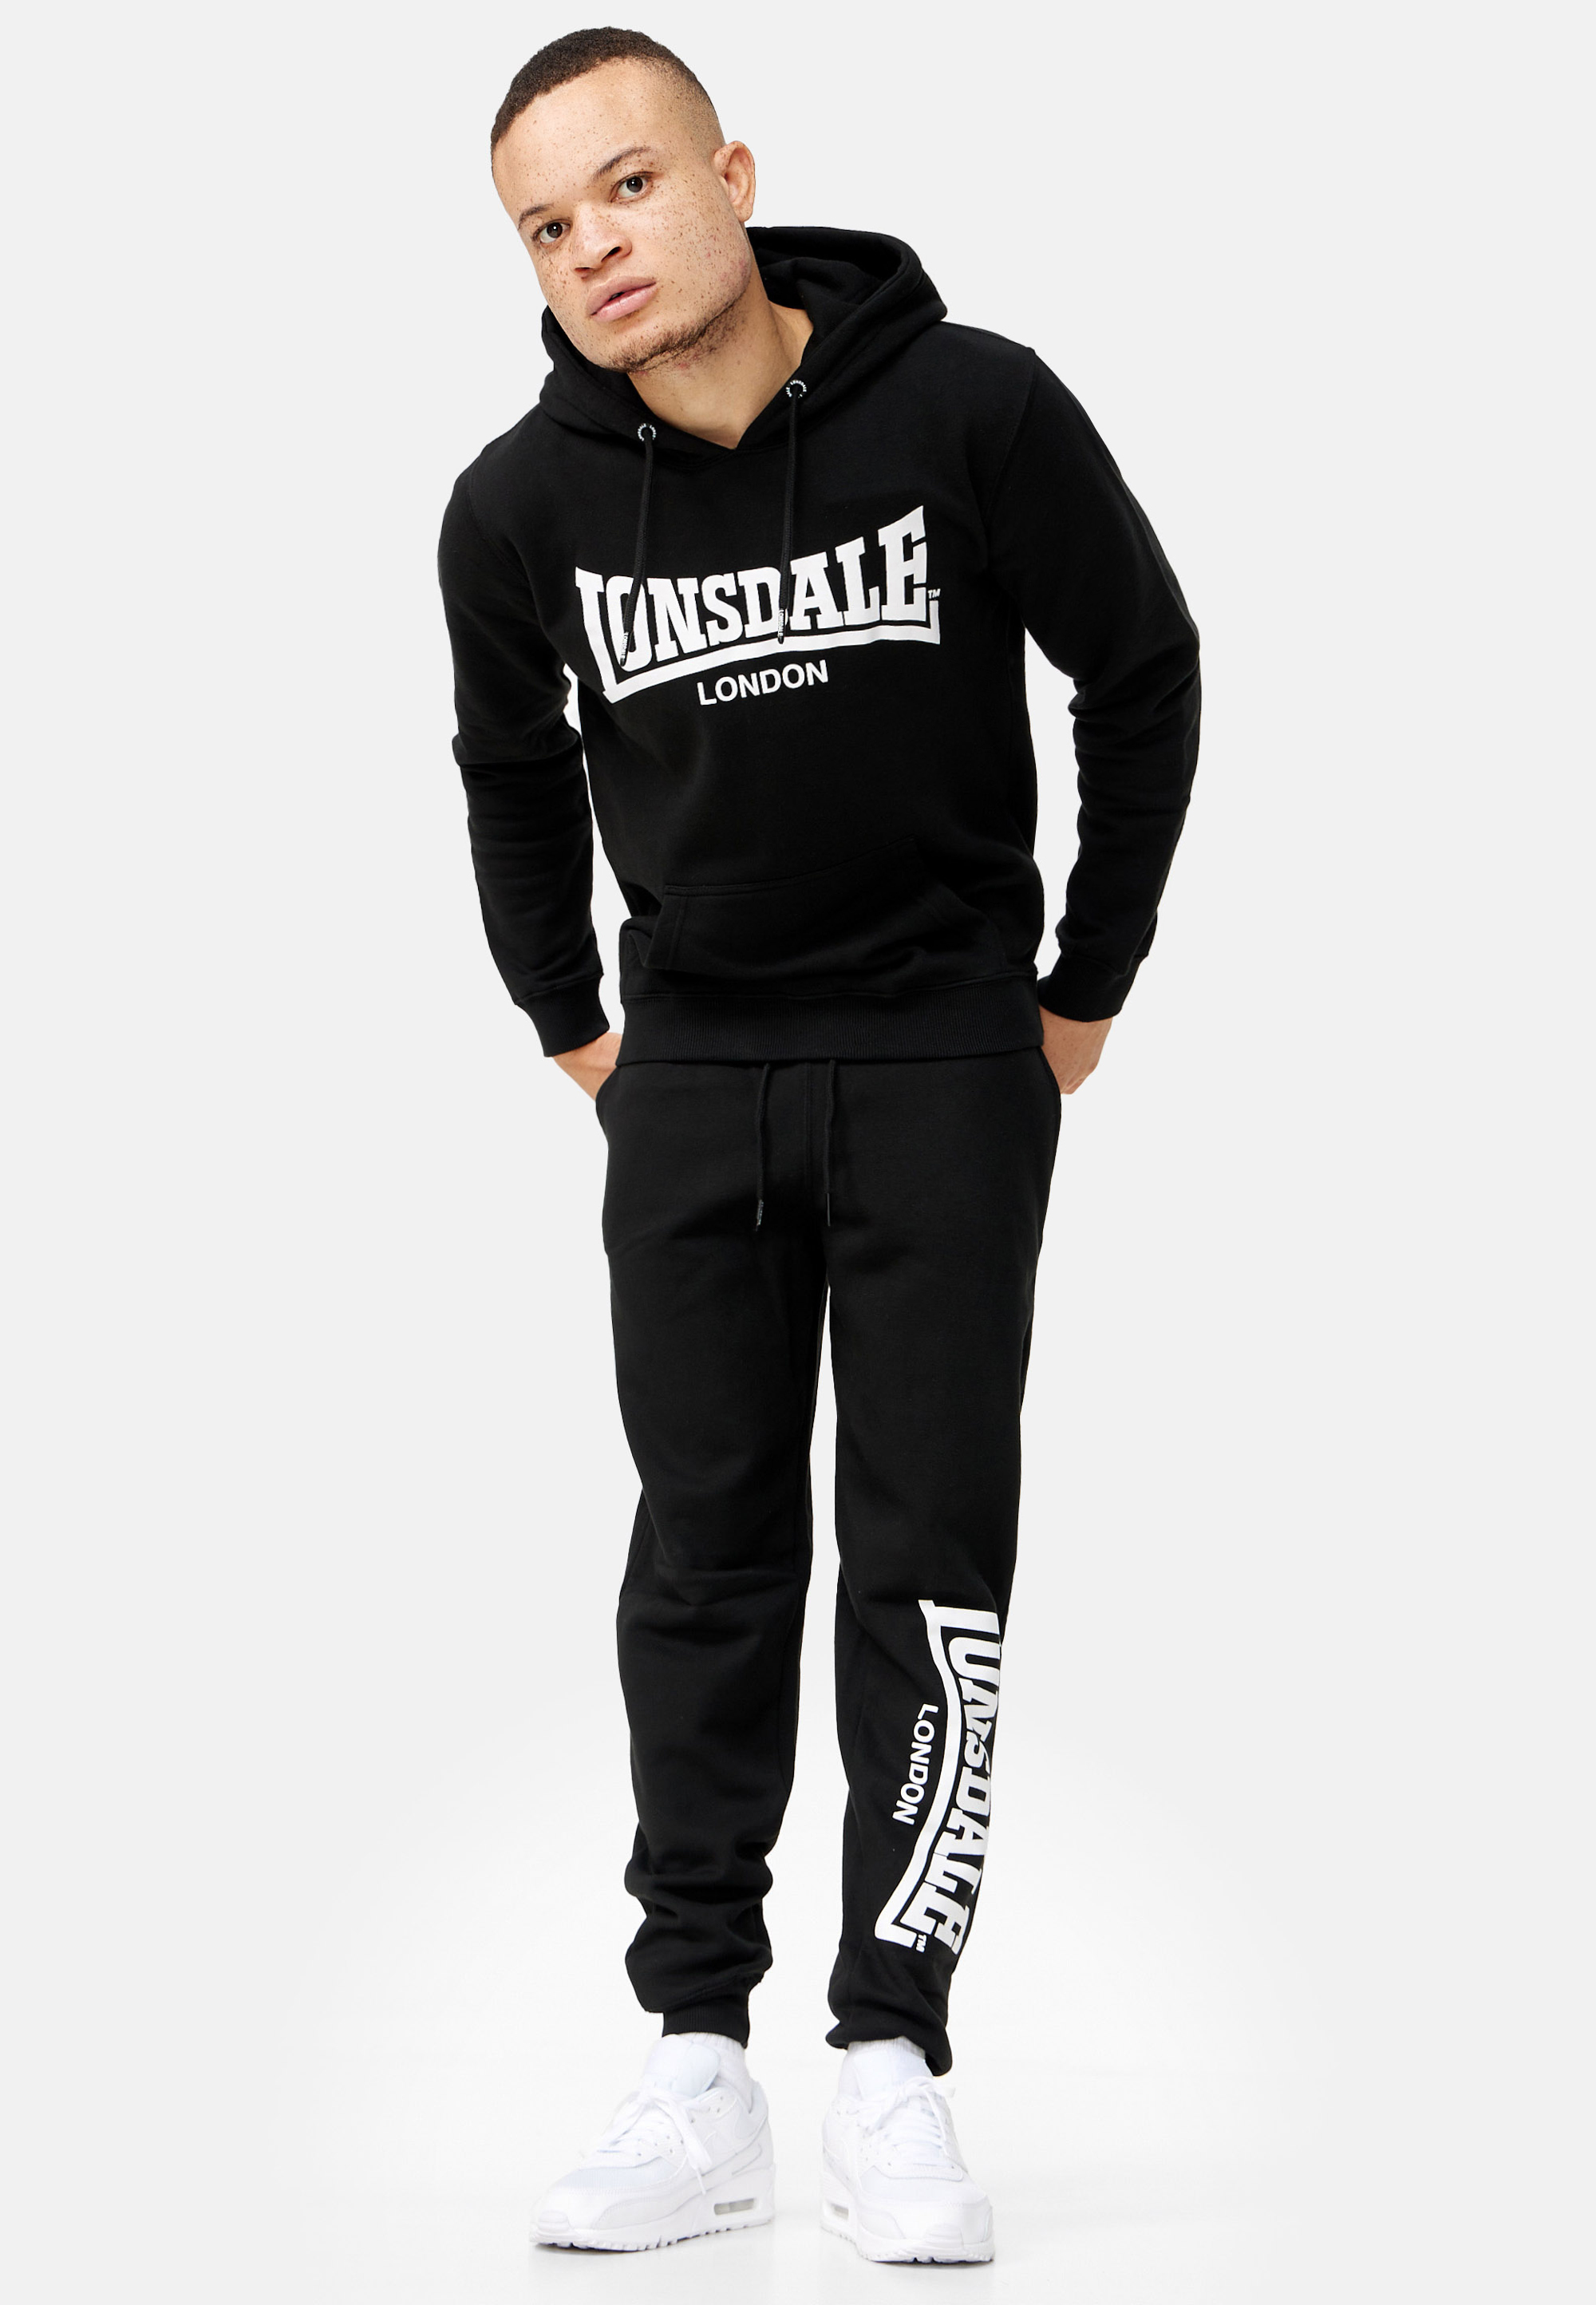 Chándal Con Capucha Slim Fit Cloudy Lonsdale - negro-blanco - 